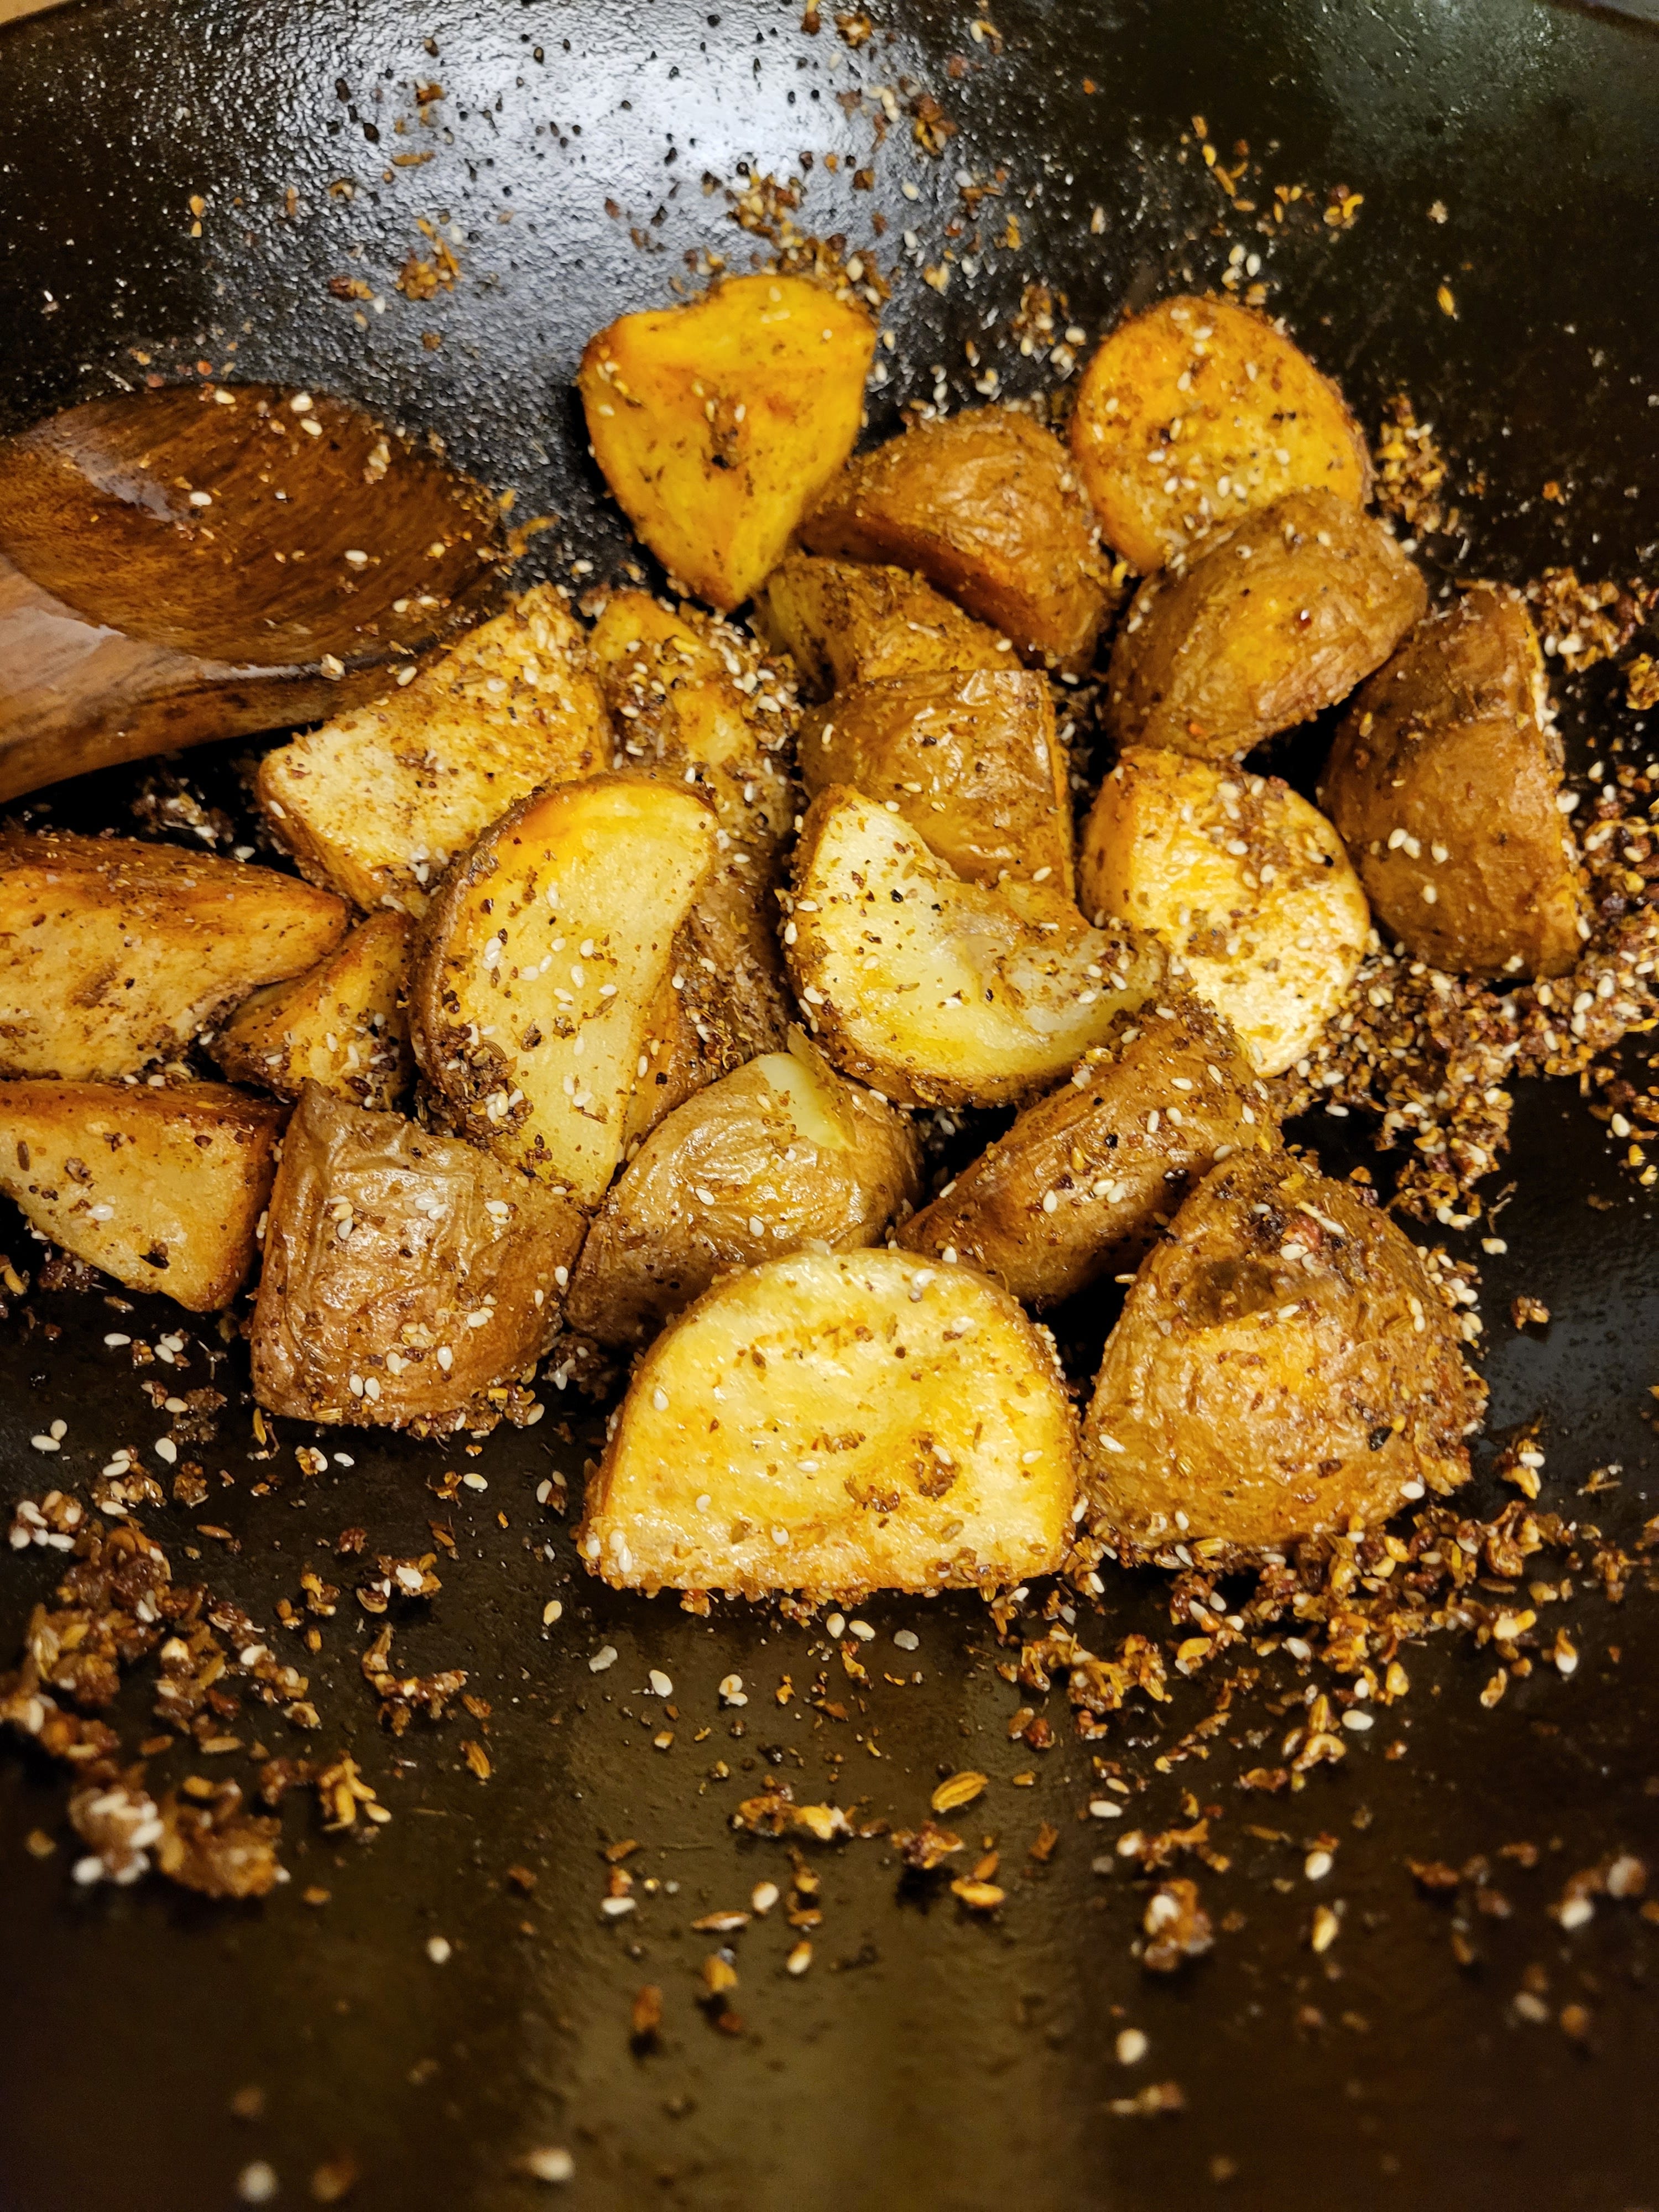 Hot and Numbing Stir-Fried New Potatoes Recipe - NYT Cooking